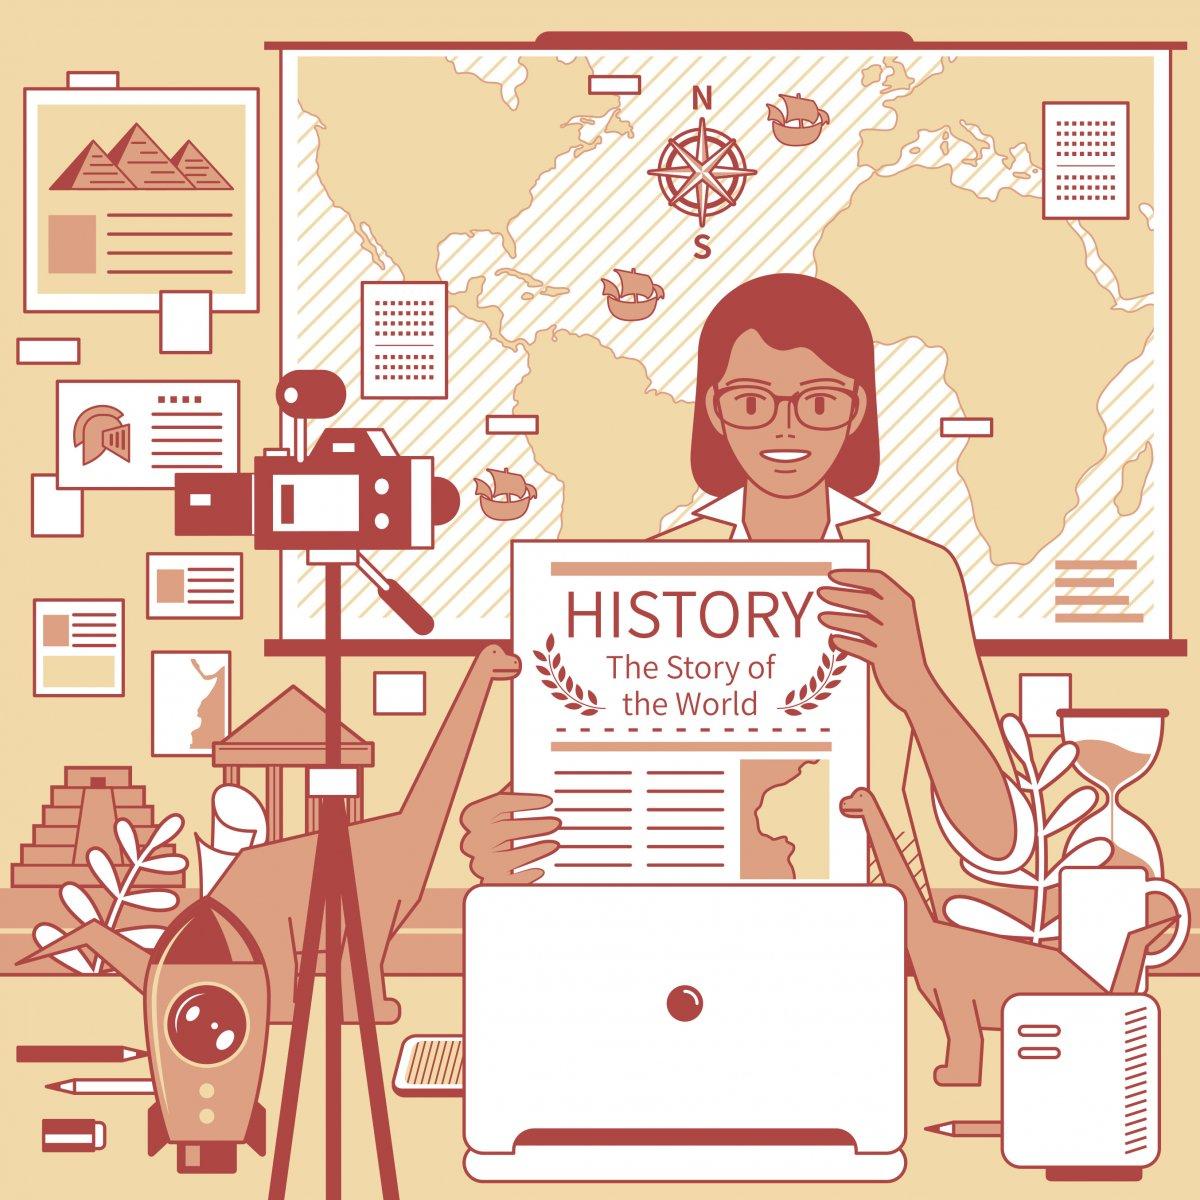 The Benefits of Working with an Online History Tutor